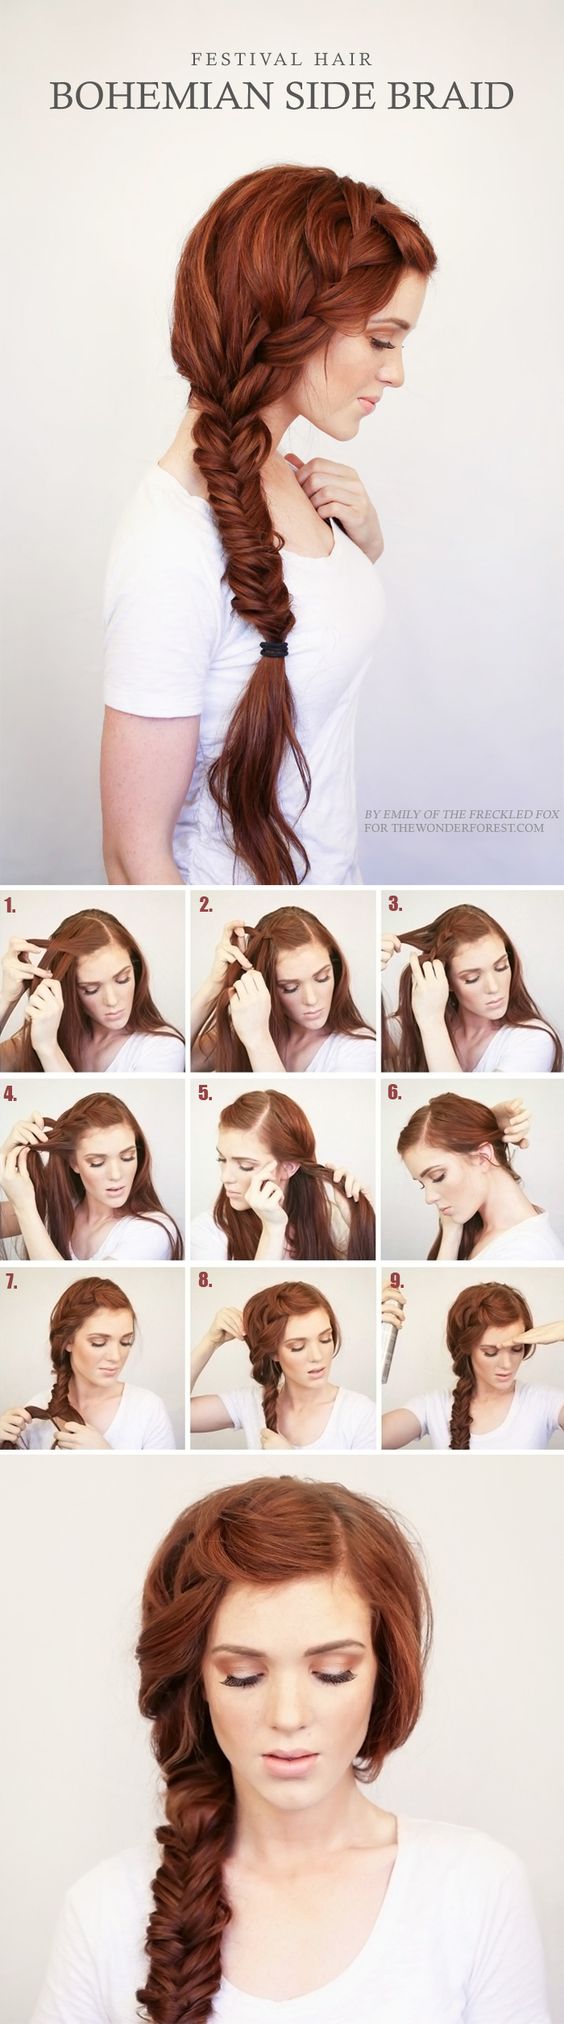 10 Easy And Cute Hair Tutorials For Any Occassion. These hairstyles are great for any occasion whether you just want quick and casual or simple yet elegant. Great for women with medium to long hair. Want no heat waves, a messy sock bun, or stylish braids? Look no further. 